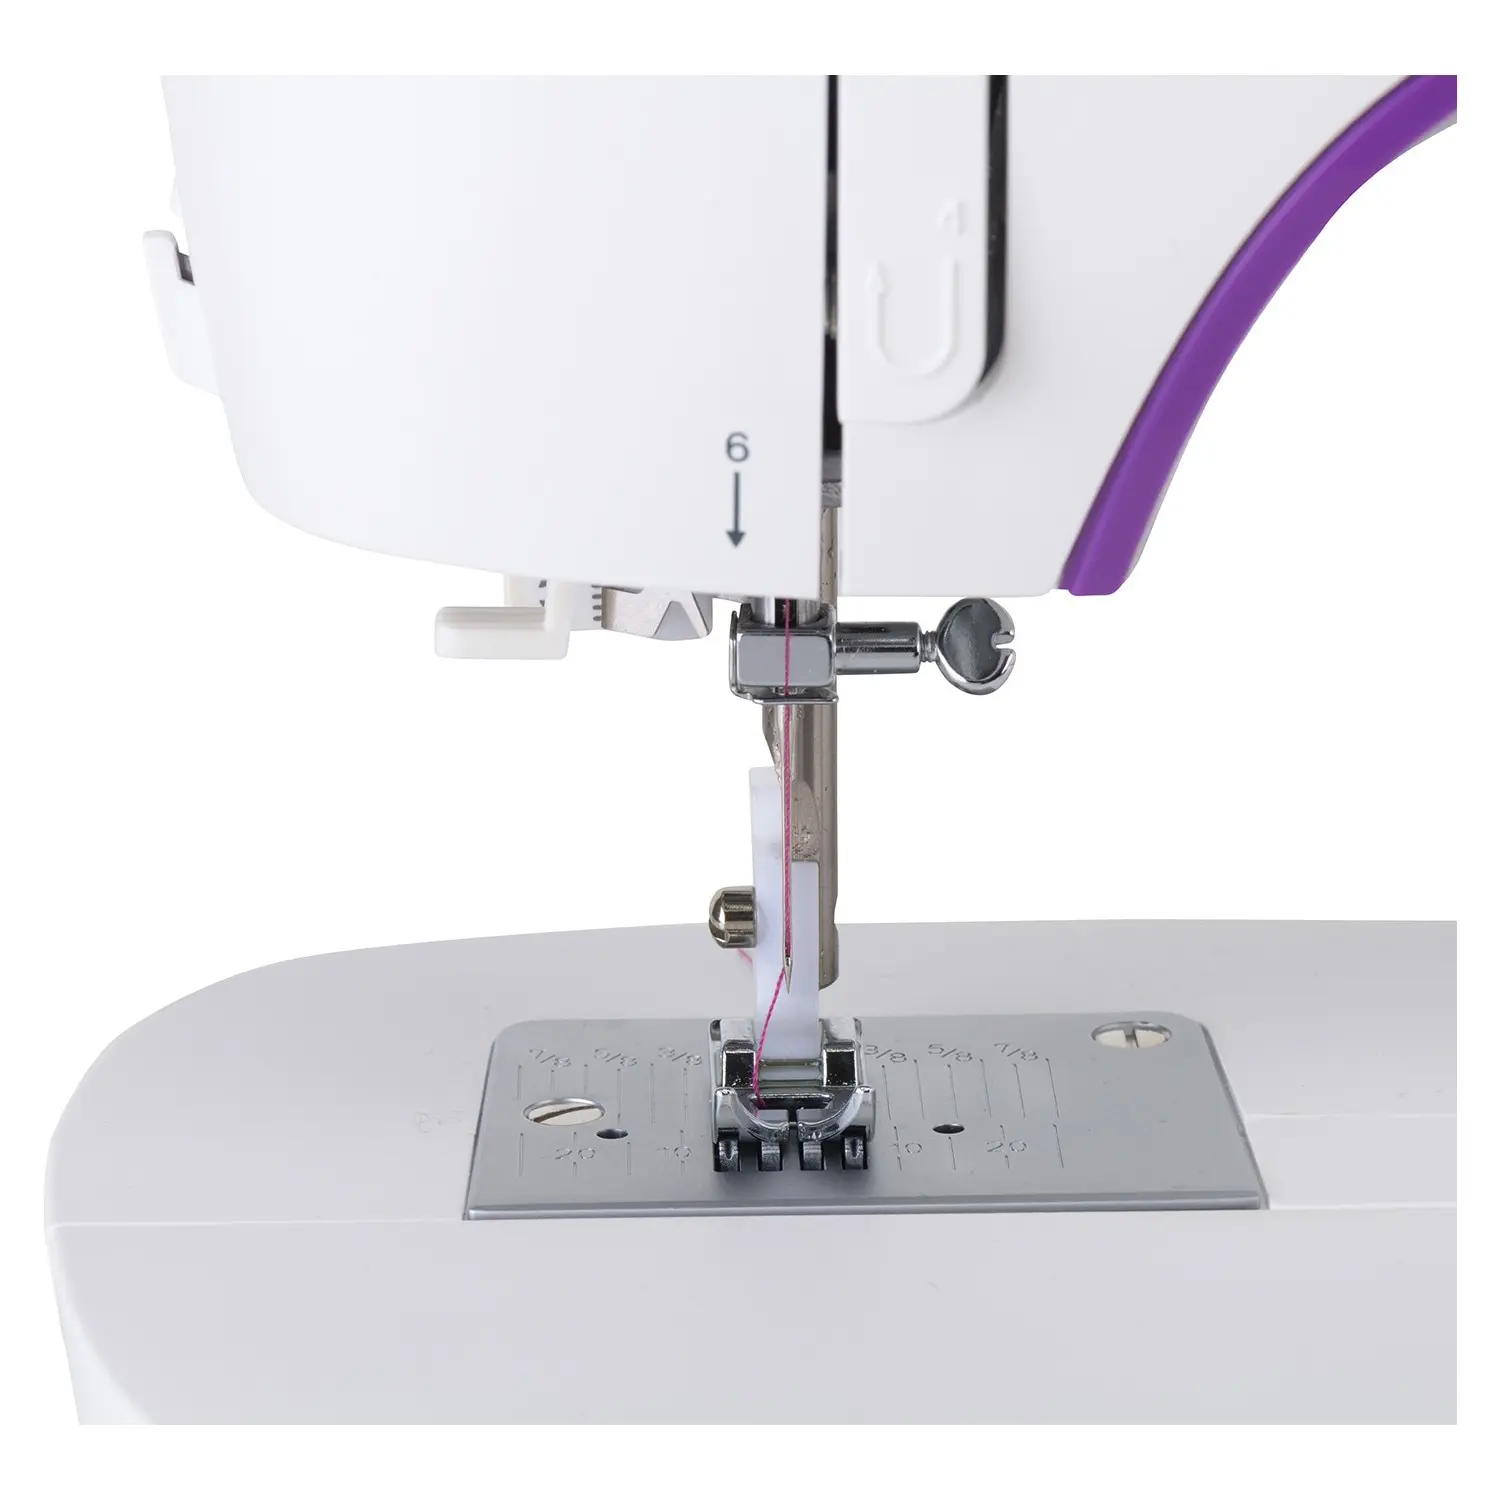 

SINGER (M3505) Electric Sewing Machine DIY All kinds of Sewing work at home Art or Clothes Ability to Sew Zipper Buttonhole